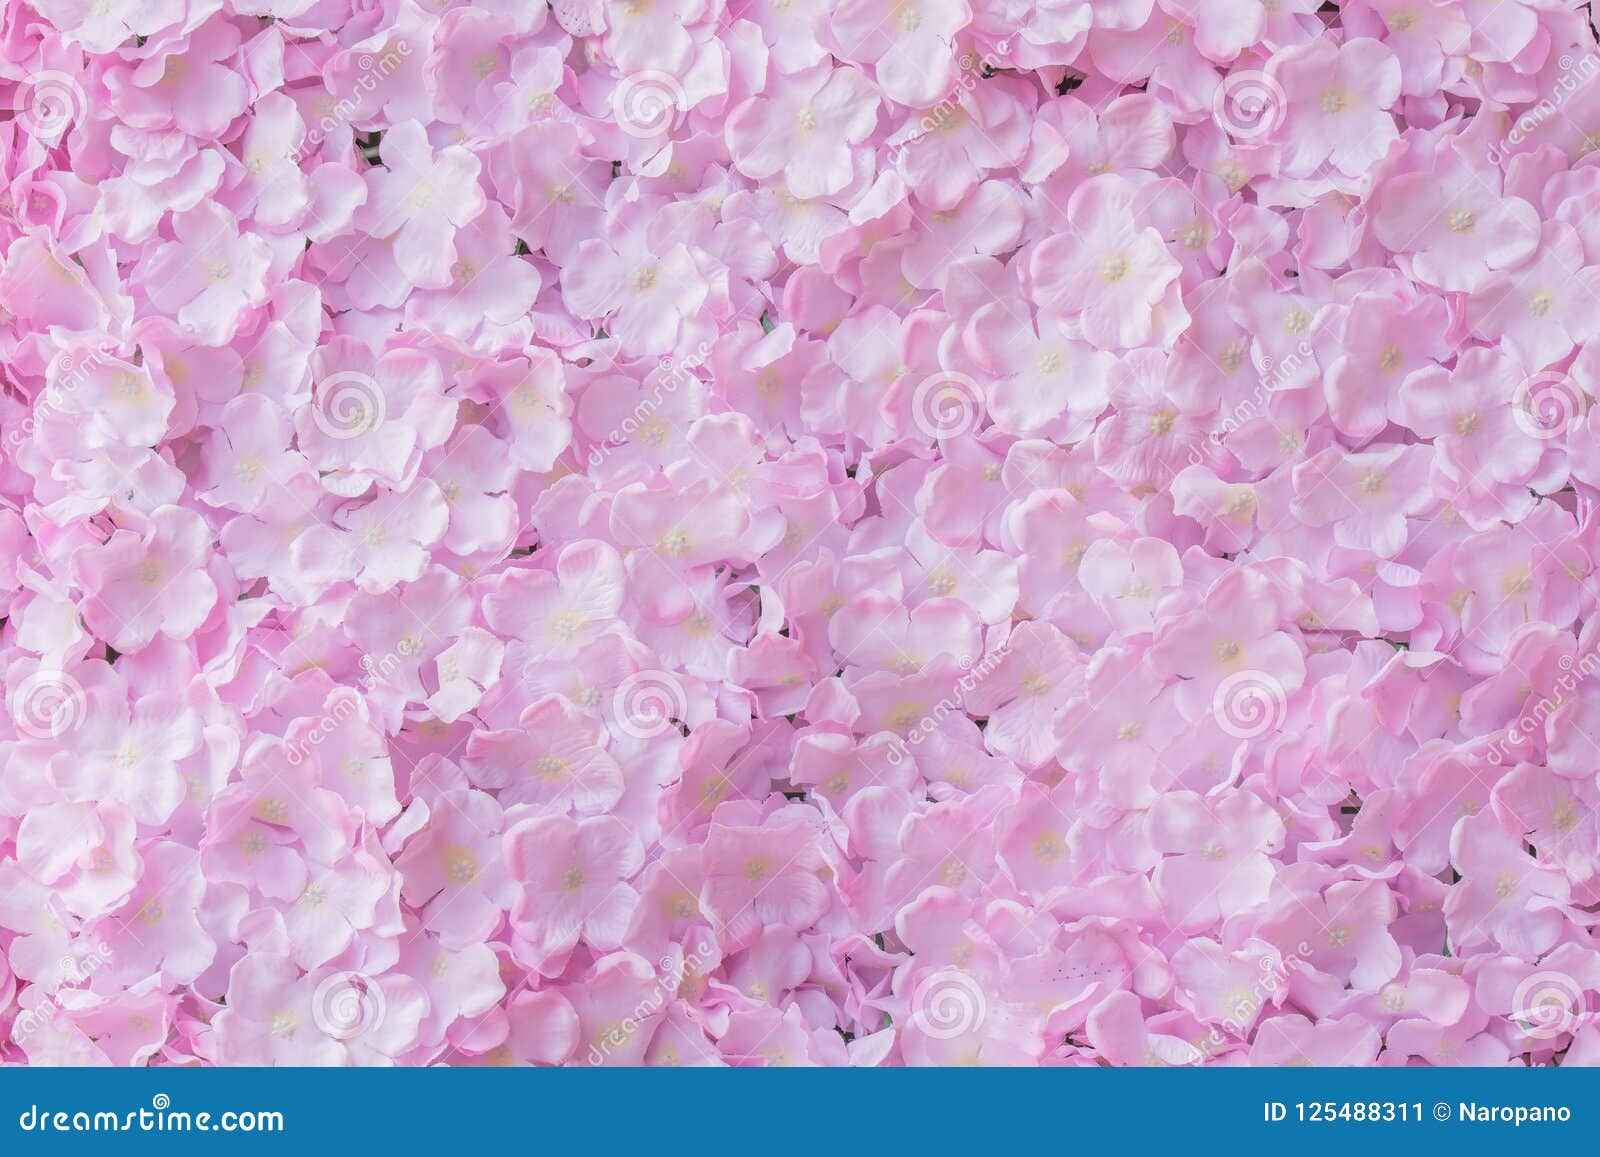 Pink flower background stock image. Image of light, bright - 125488311